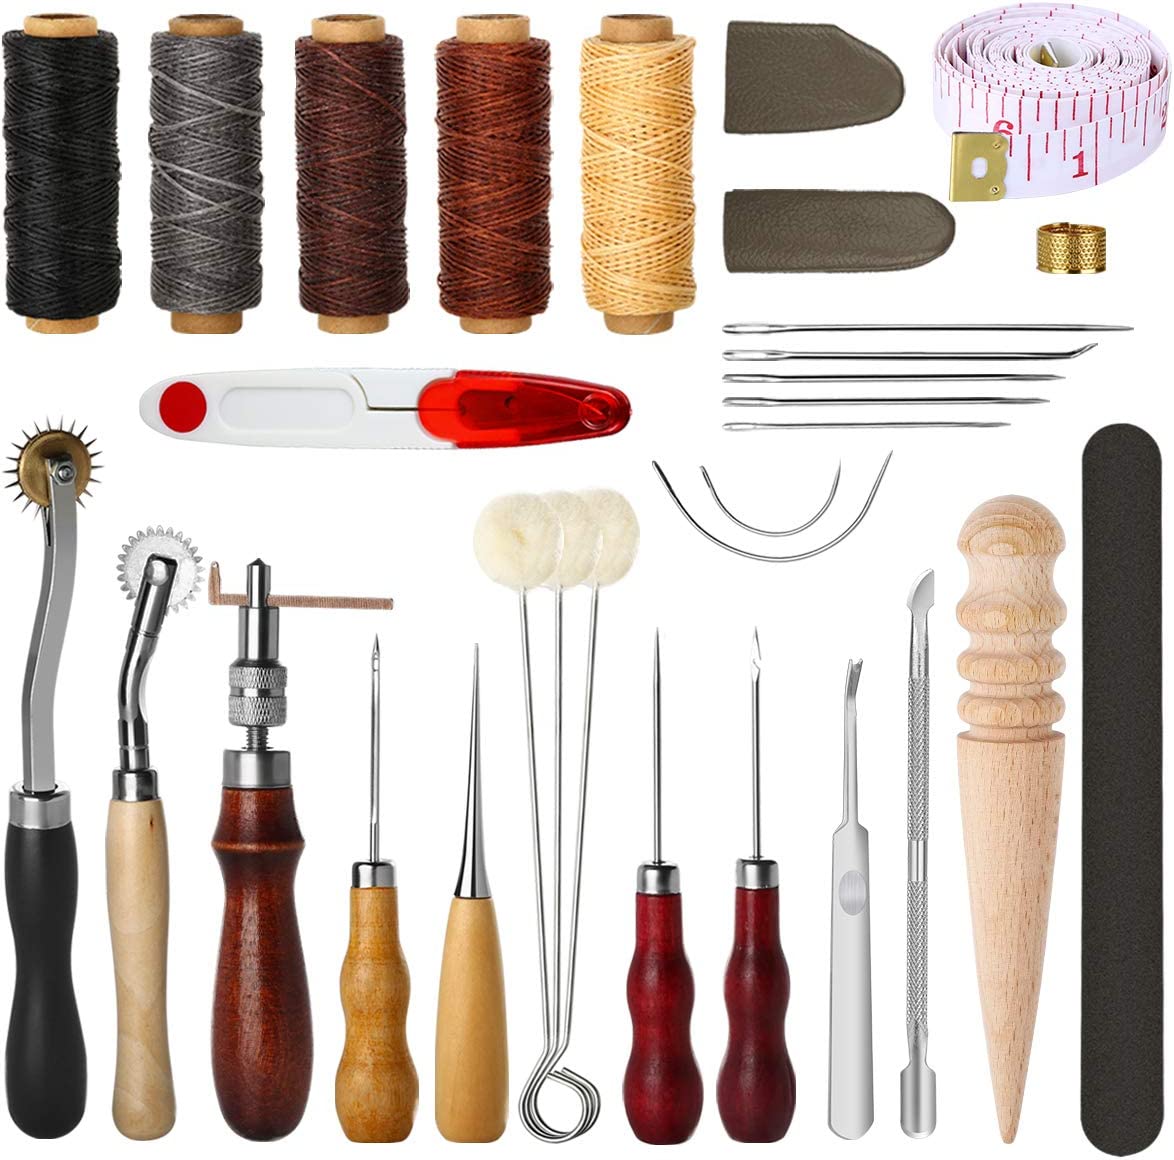 Leather Tool Kit 5 Rolls Of Leather Wax Thread Leather Sewing Tool, Sewing  Accessory, For Sewing Leather Leather Tool Supplies Household Leather Kit 